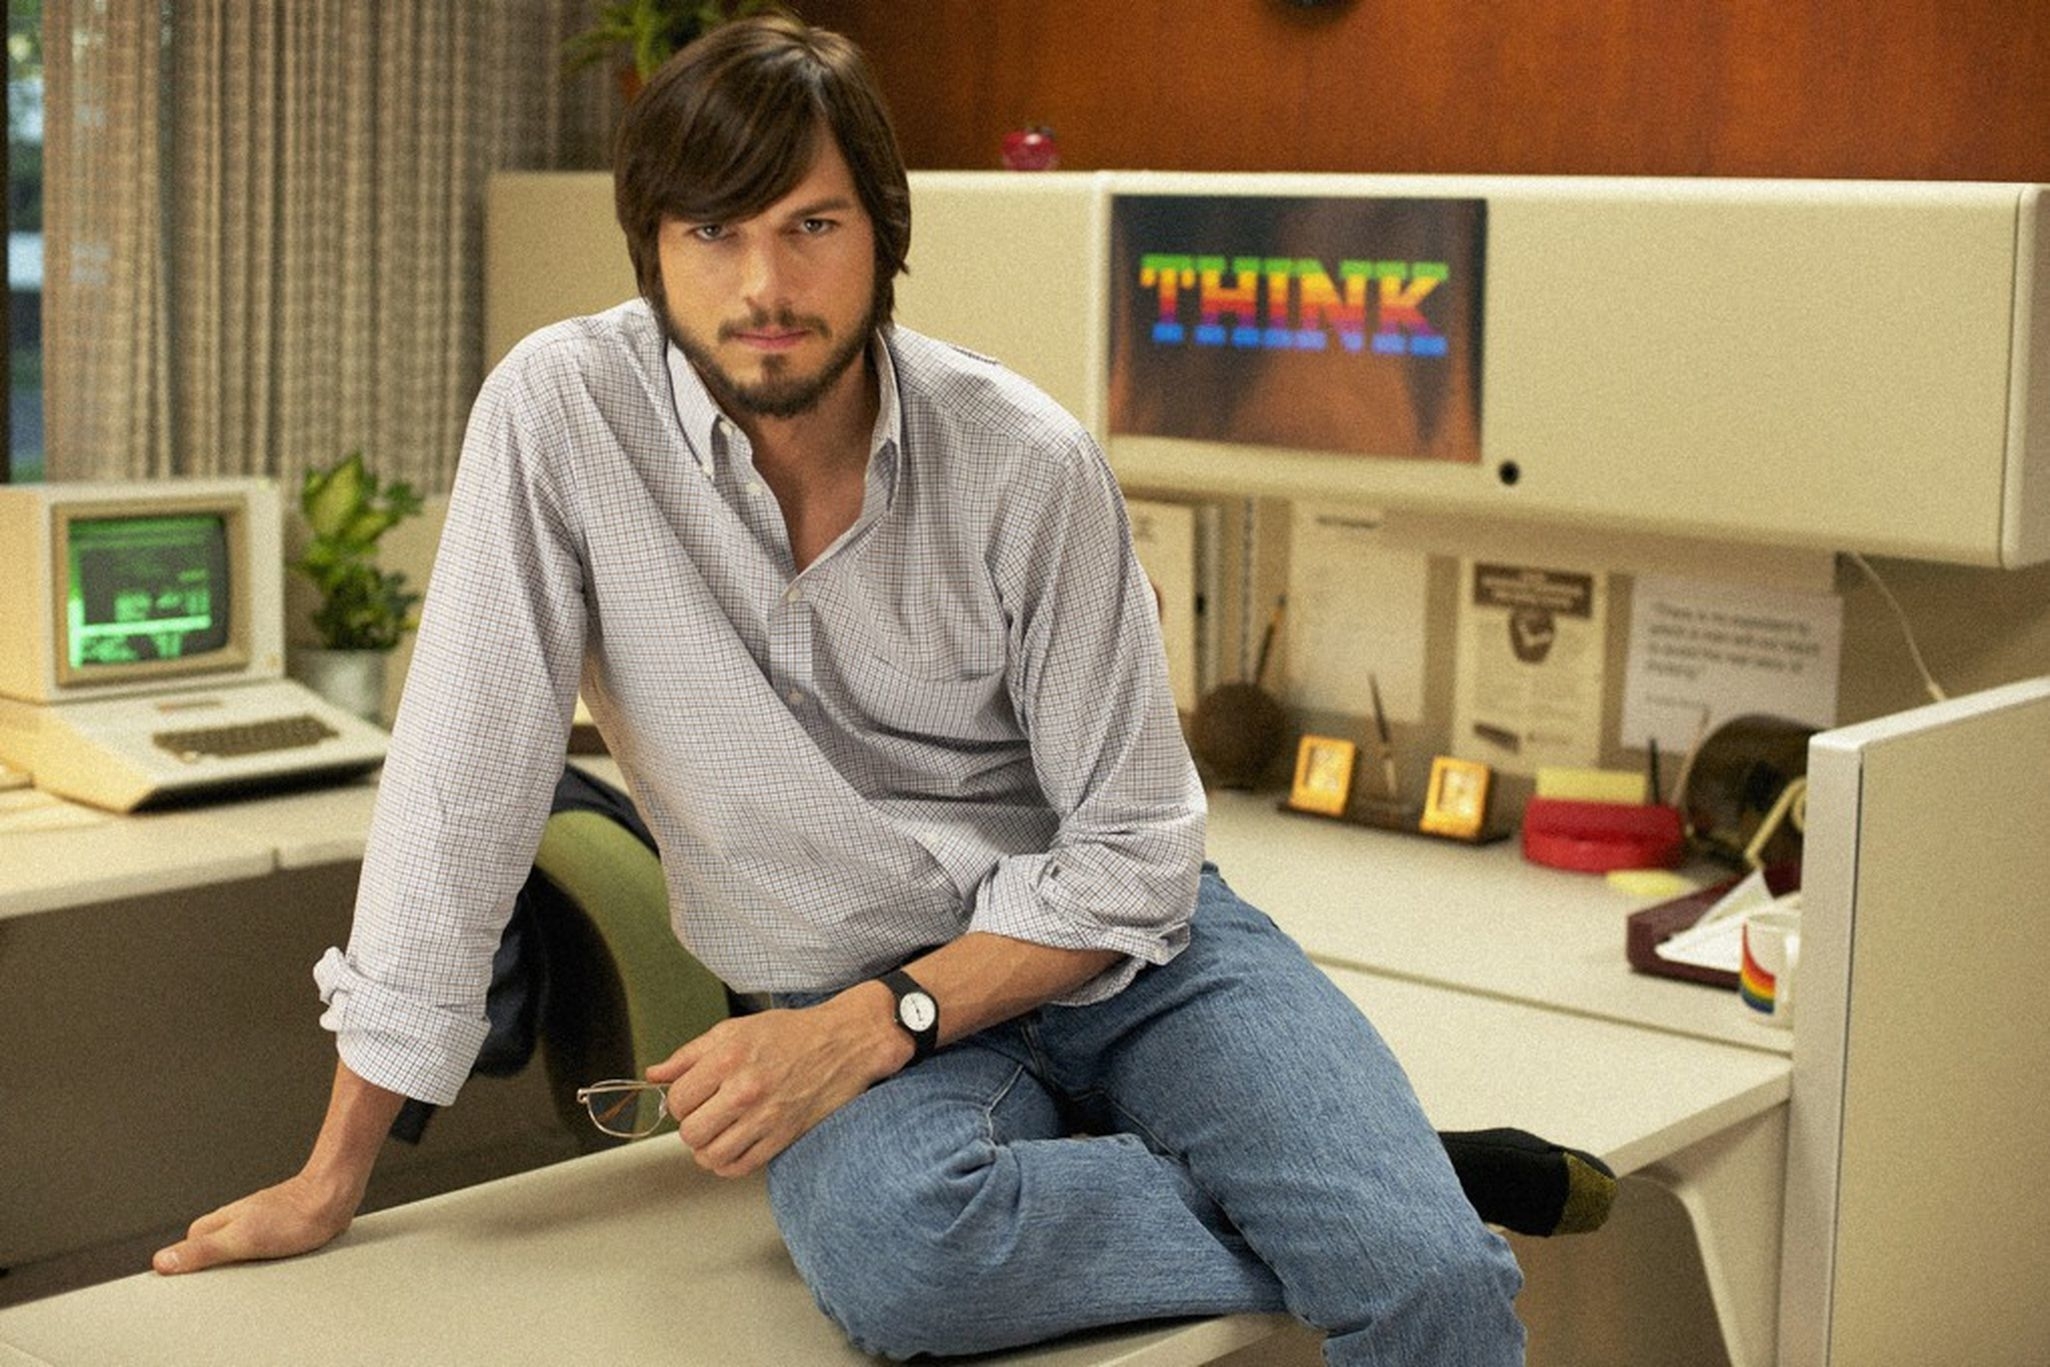 Man resembling Steve Jobs sitting on a desk in an office, with a retro computer and &quot;THINK&quot; poster in background